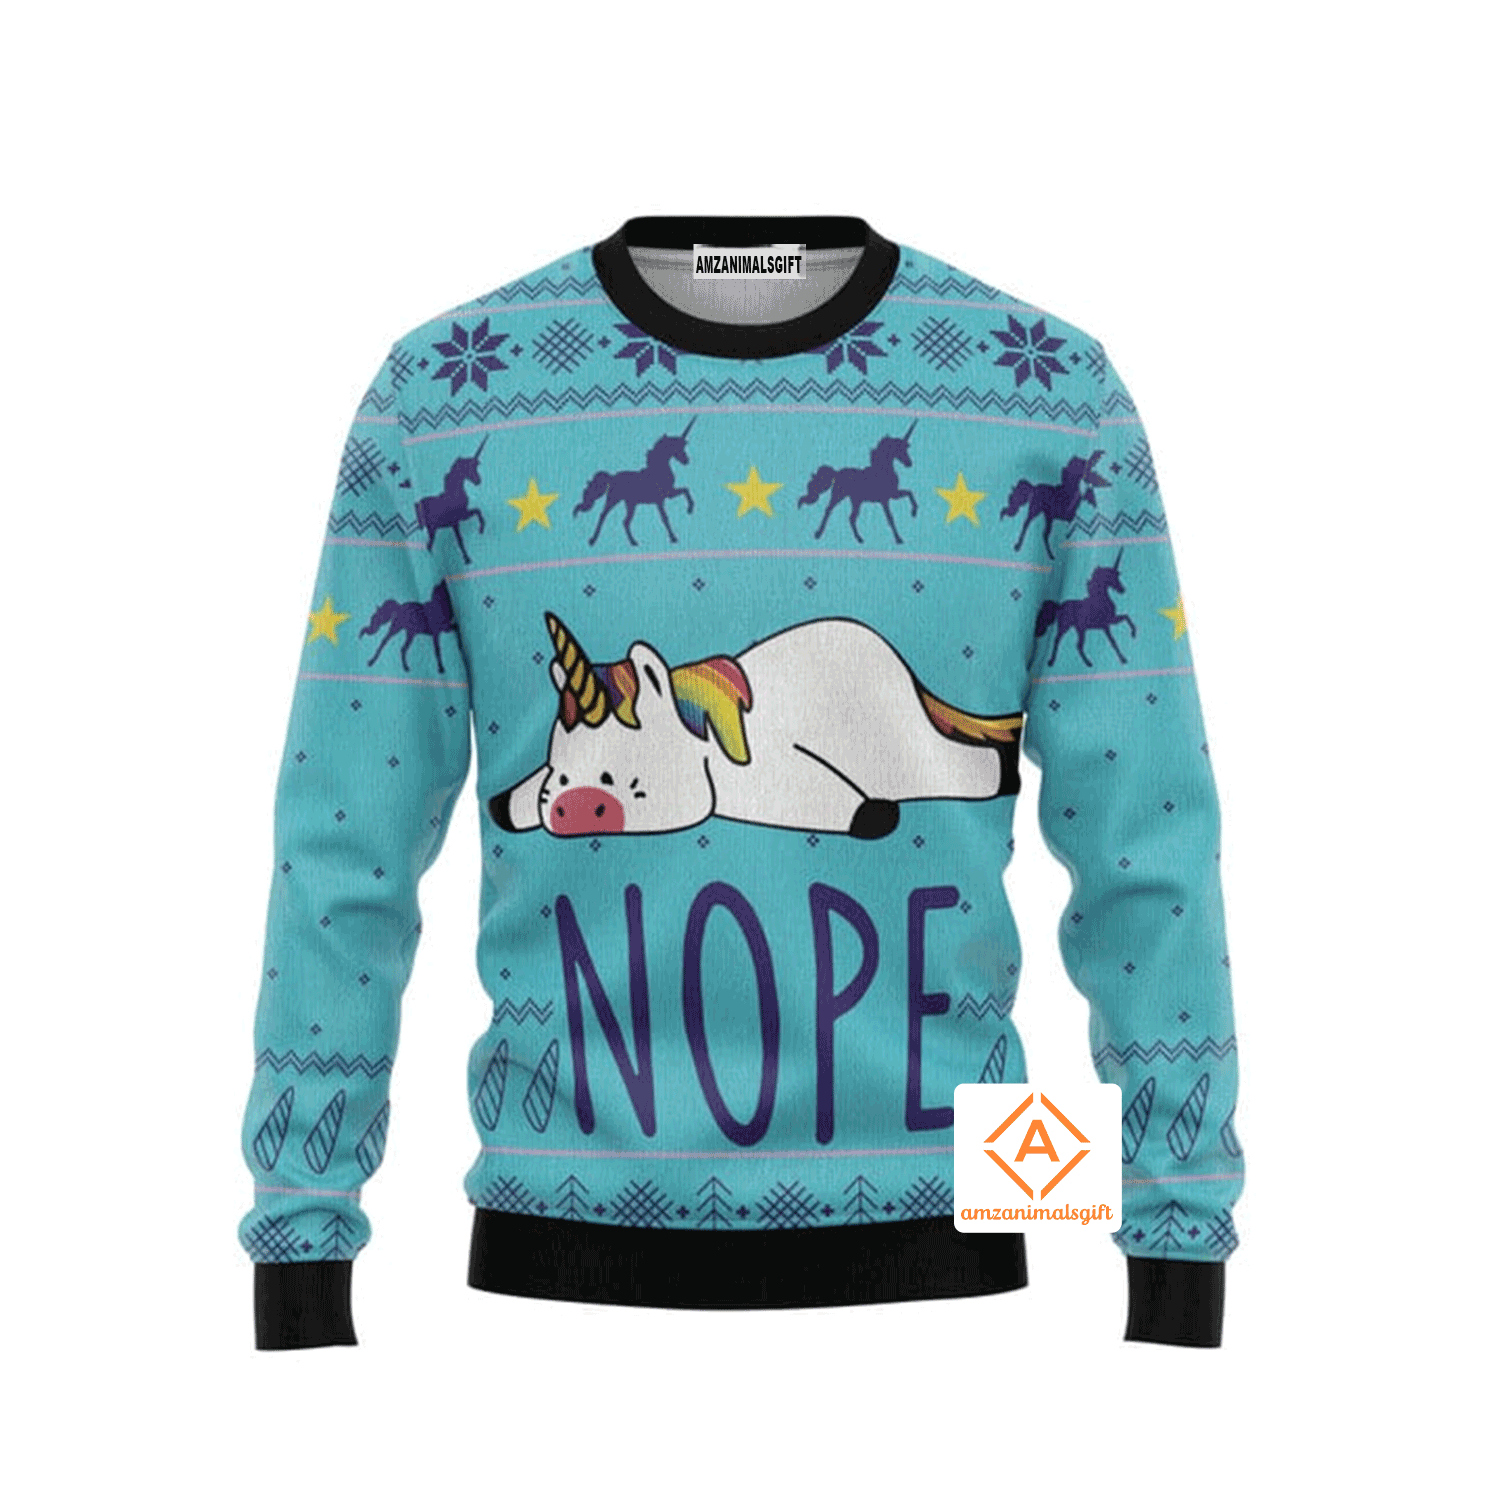 Unicorn Nope Christmas Sweater, Ugly Sweater For Men & Women, Perfect Outfit For Christmas New Year Autumn Winter